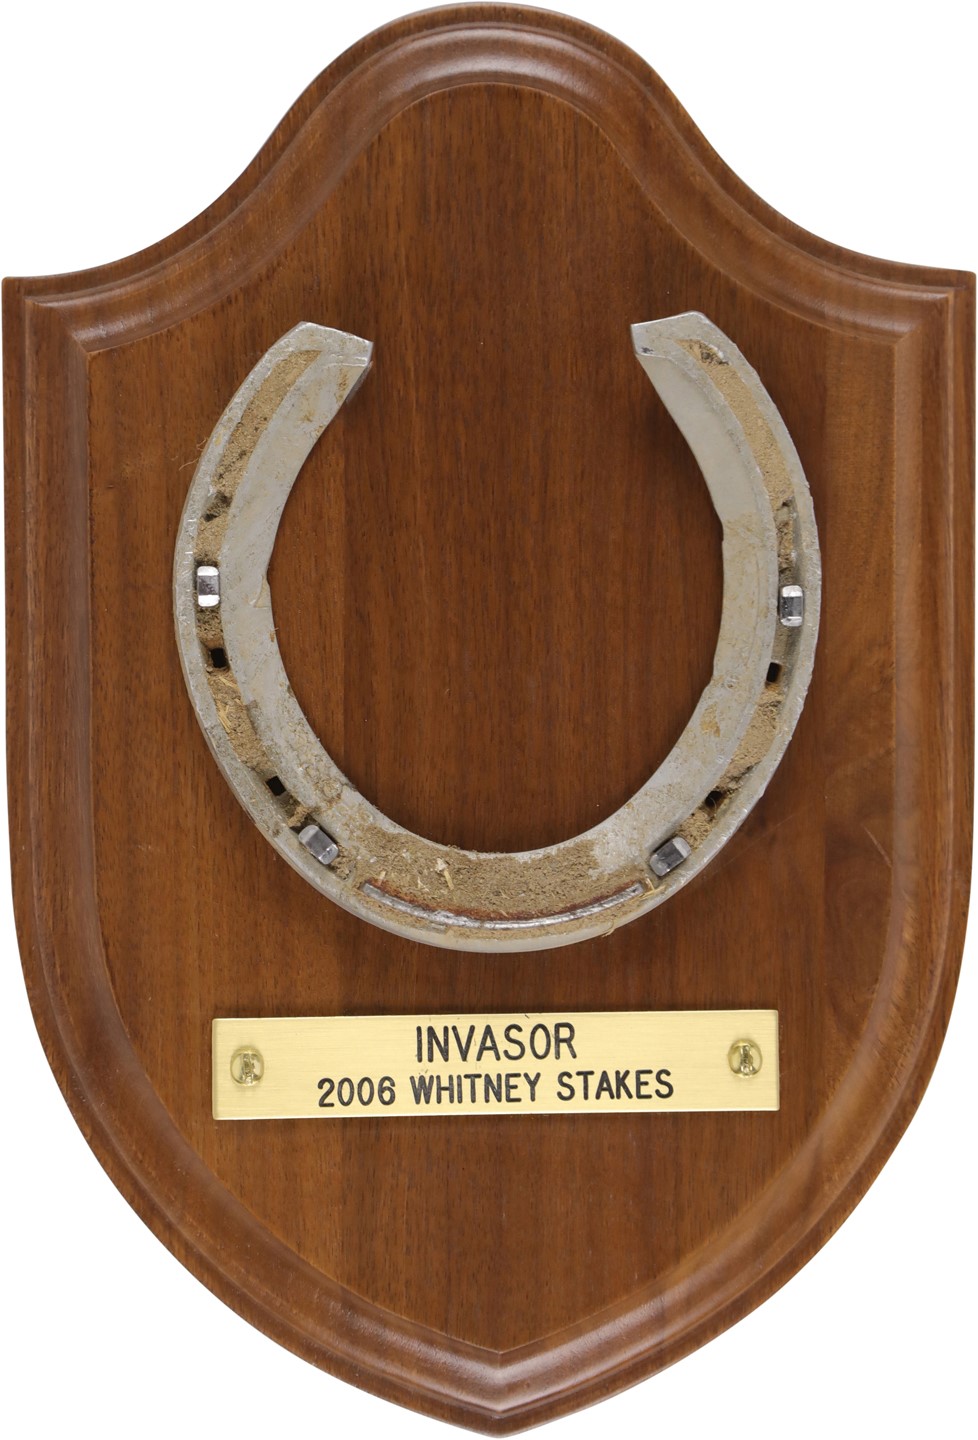 Horse Racing - Invasor Whitney Horse of the Year Shoe